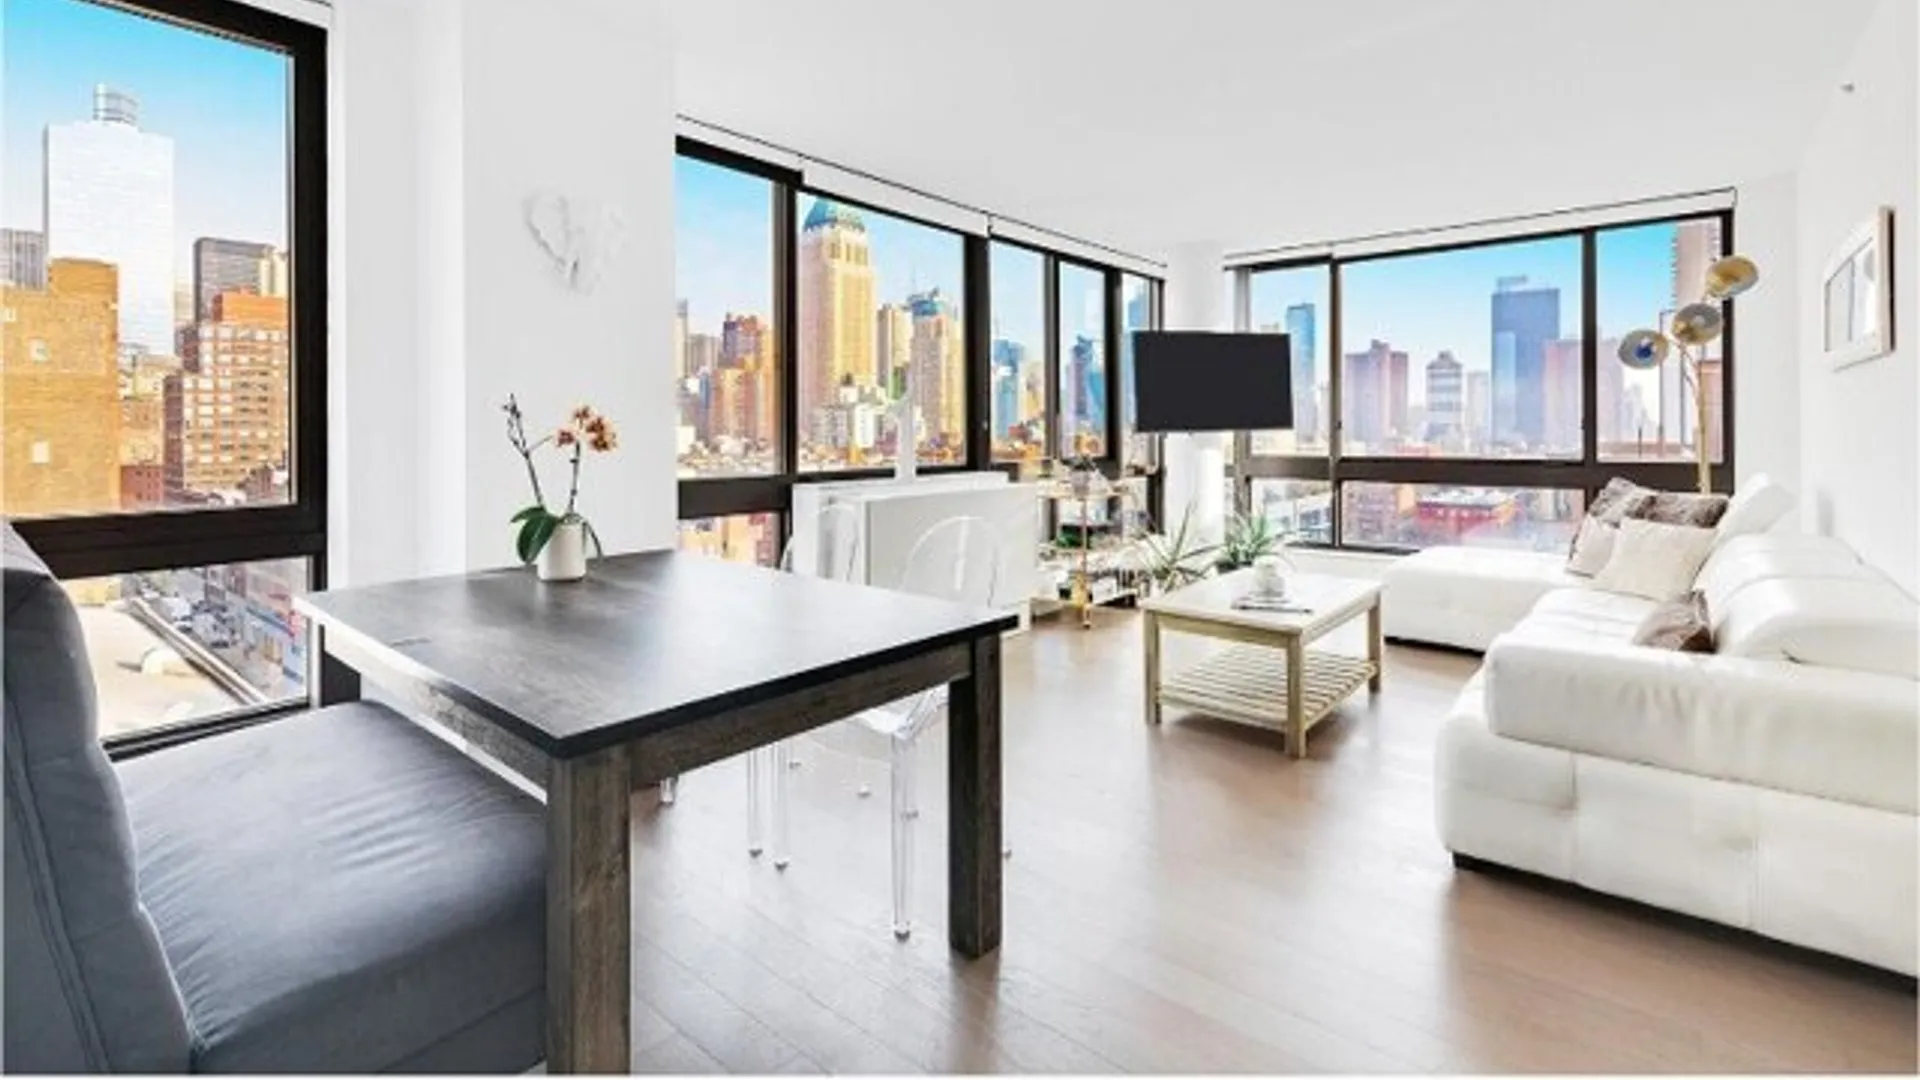 The Westport, 500 West 56th Street, New York, NY 10019, USA | 1 bed house for rent